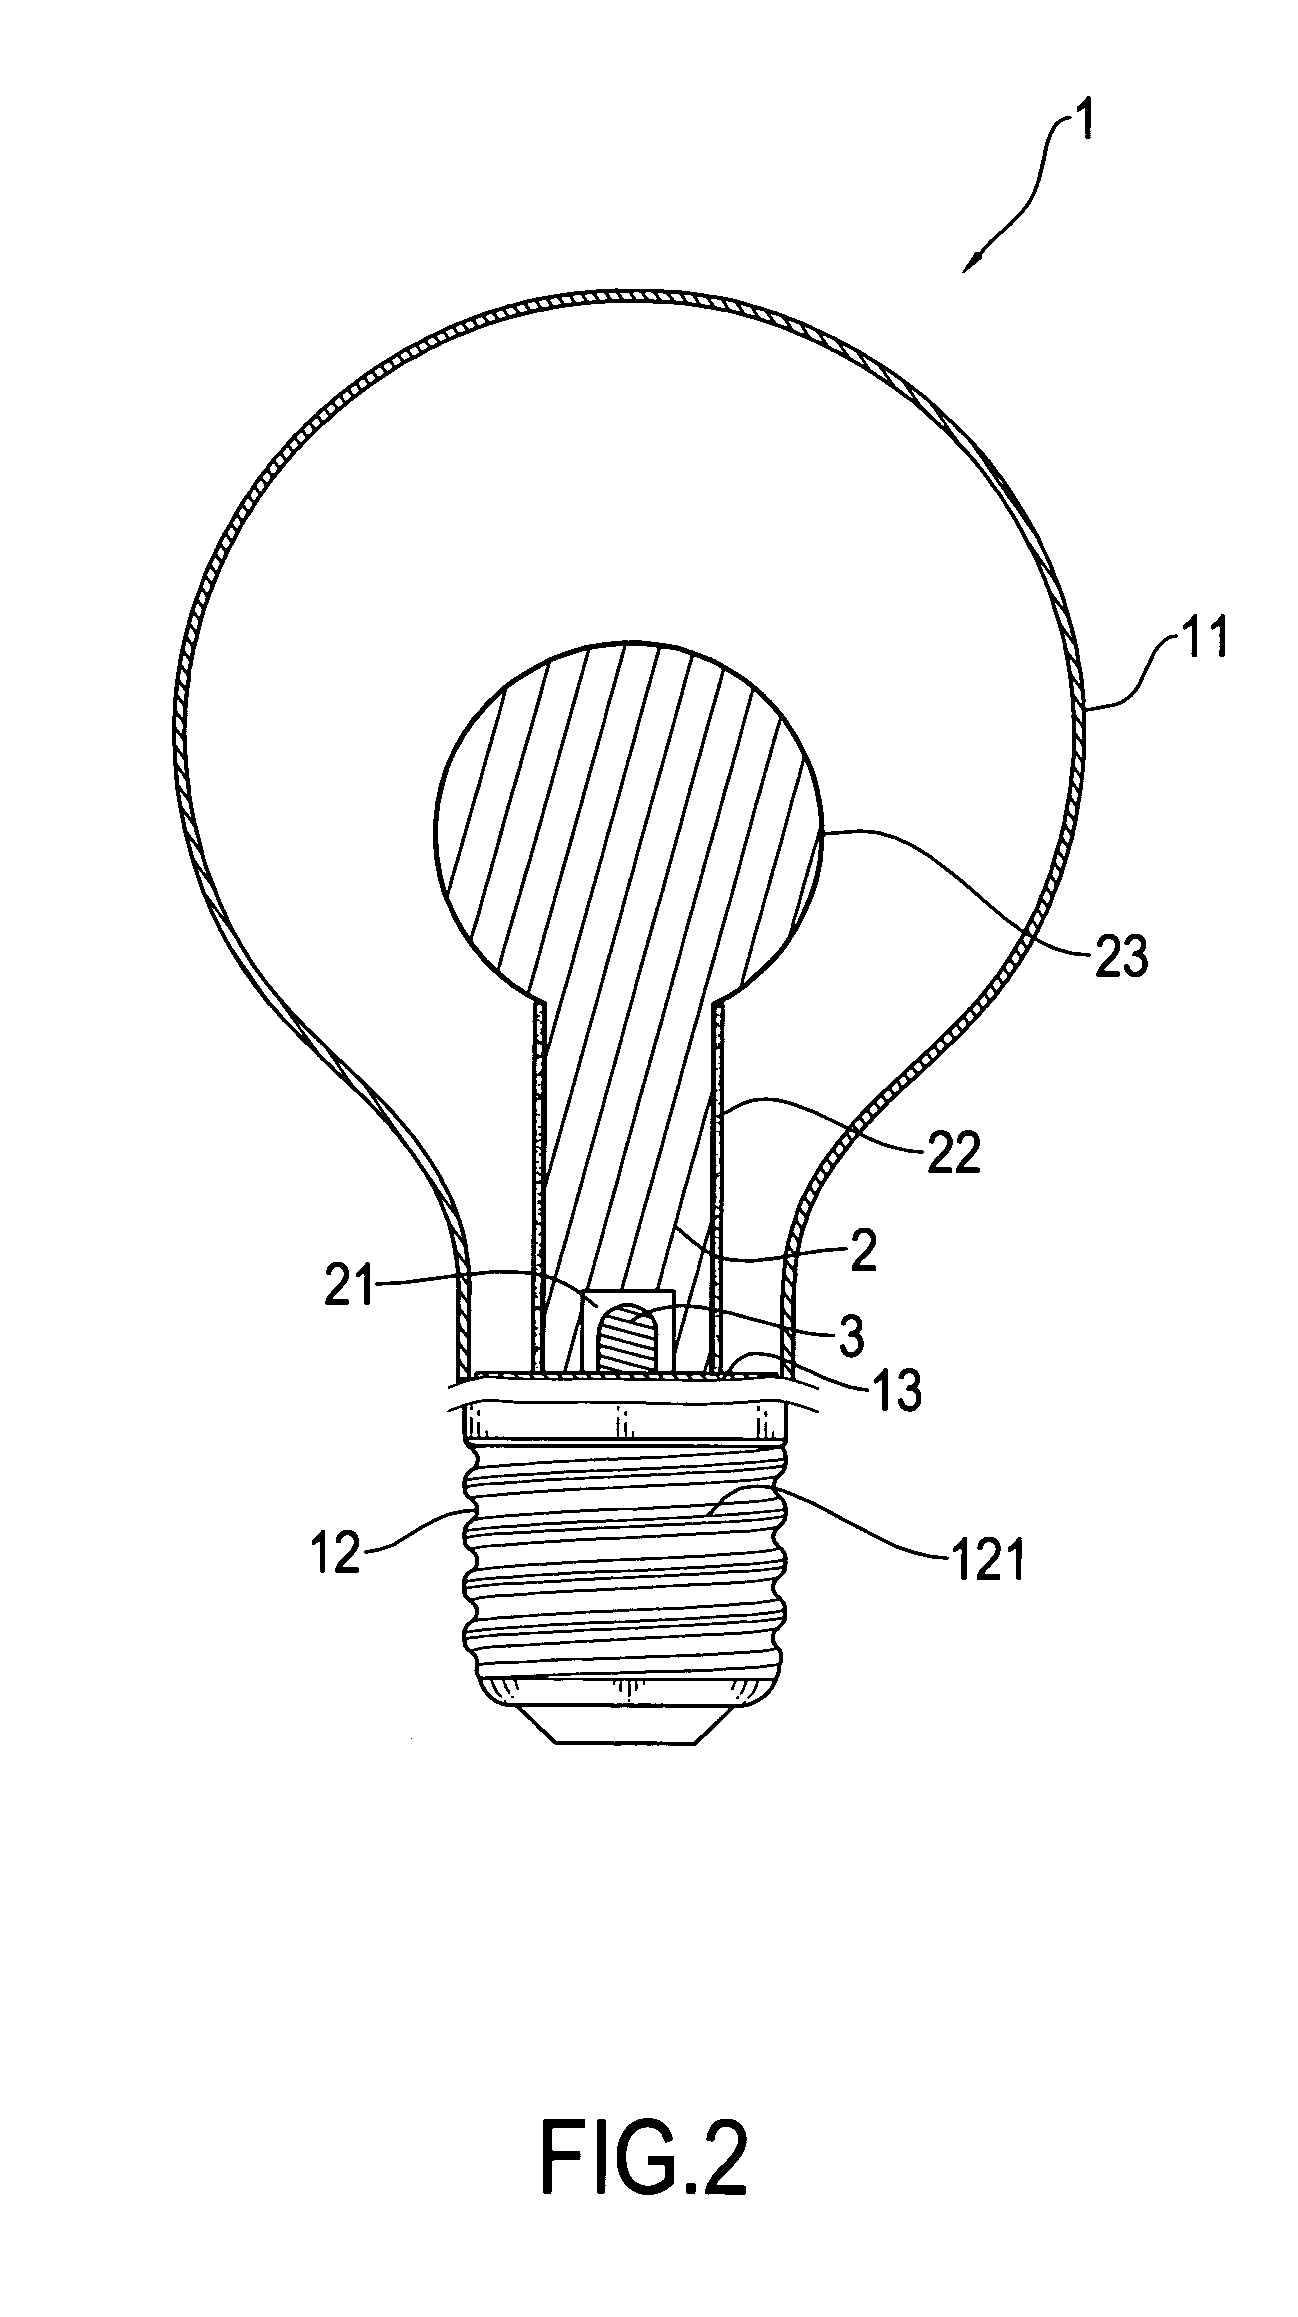 Structure of light bulb